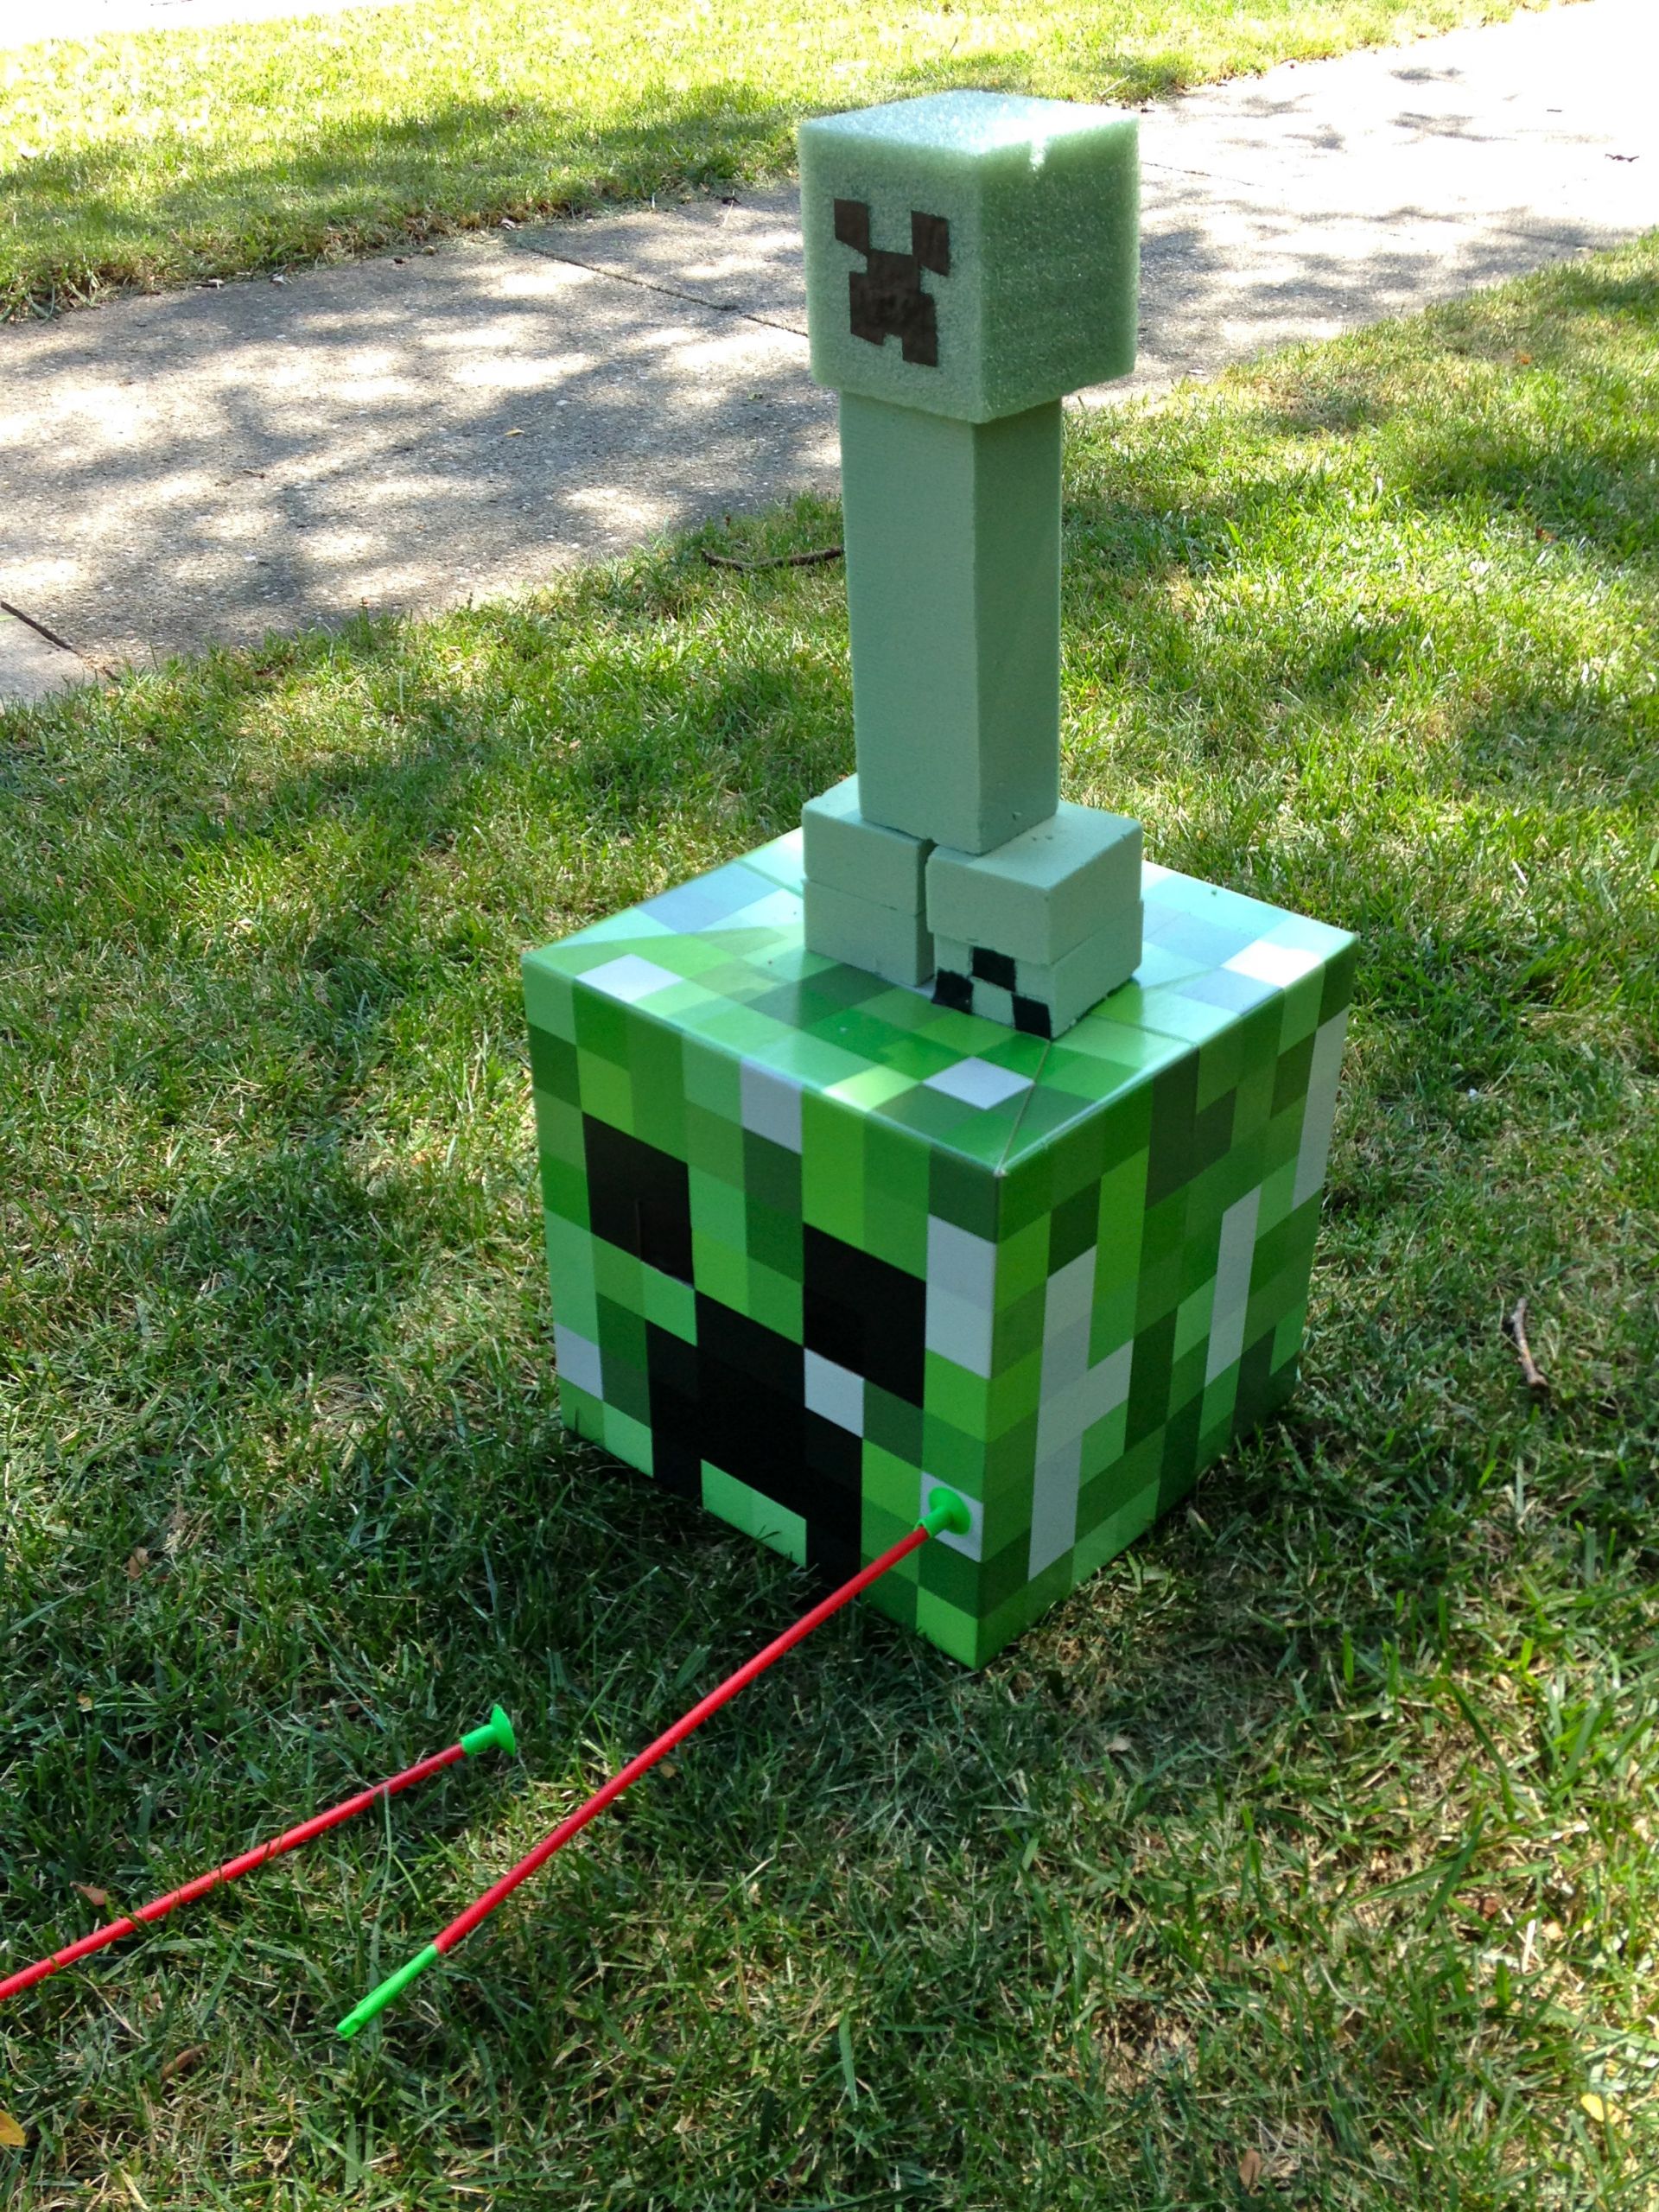 Minecraft Birthday Party Game Ideas
 An Epic Minecraft Birthday Party with Games and